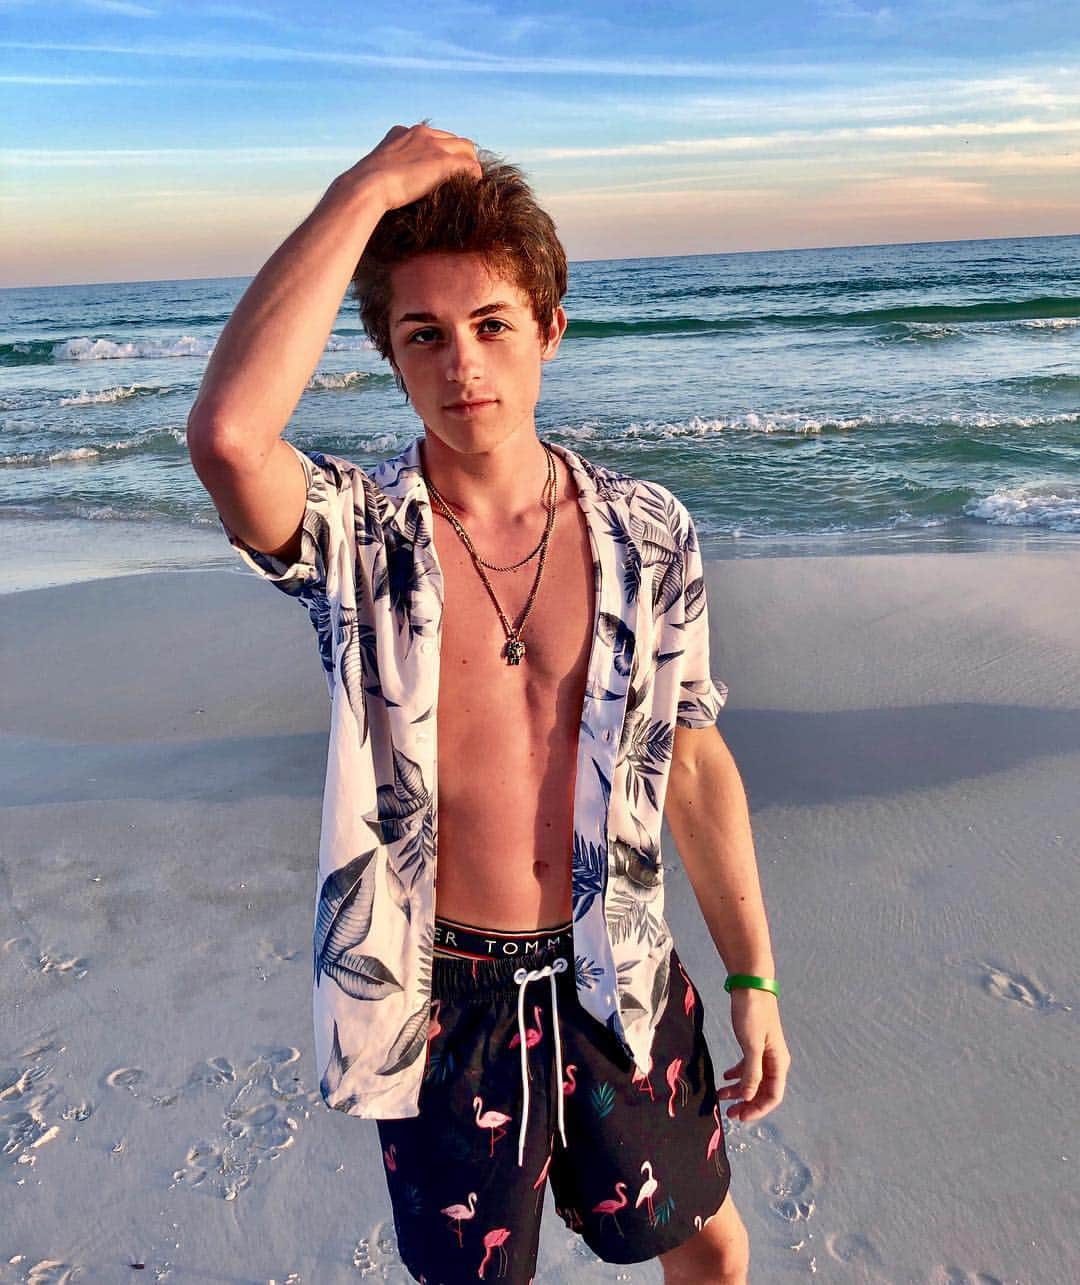 Dylan Dauzatのインスタグラム：「Yeah I’m somewhere on a beach 🌴 sippin something strong 🍺 got a new girl, she got it goin on 💁🏼‍♀️we drink all day, party all night 🎊 I’m way to drunk to have you on my mindddd 🙇🏽‍♂️ she got a bodyyyy 😛 yeah she’s naughty 😈🎶☀️」